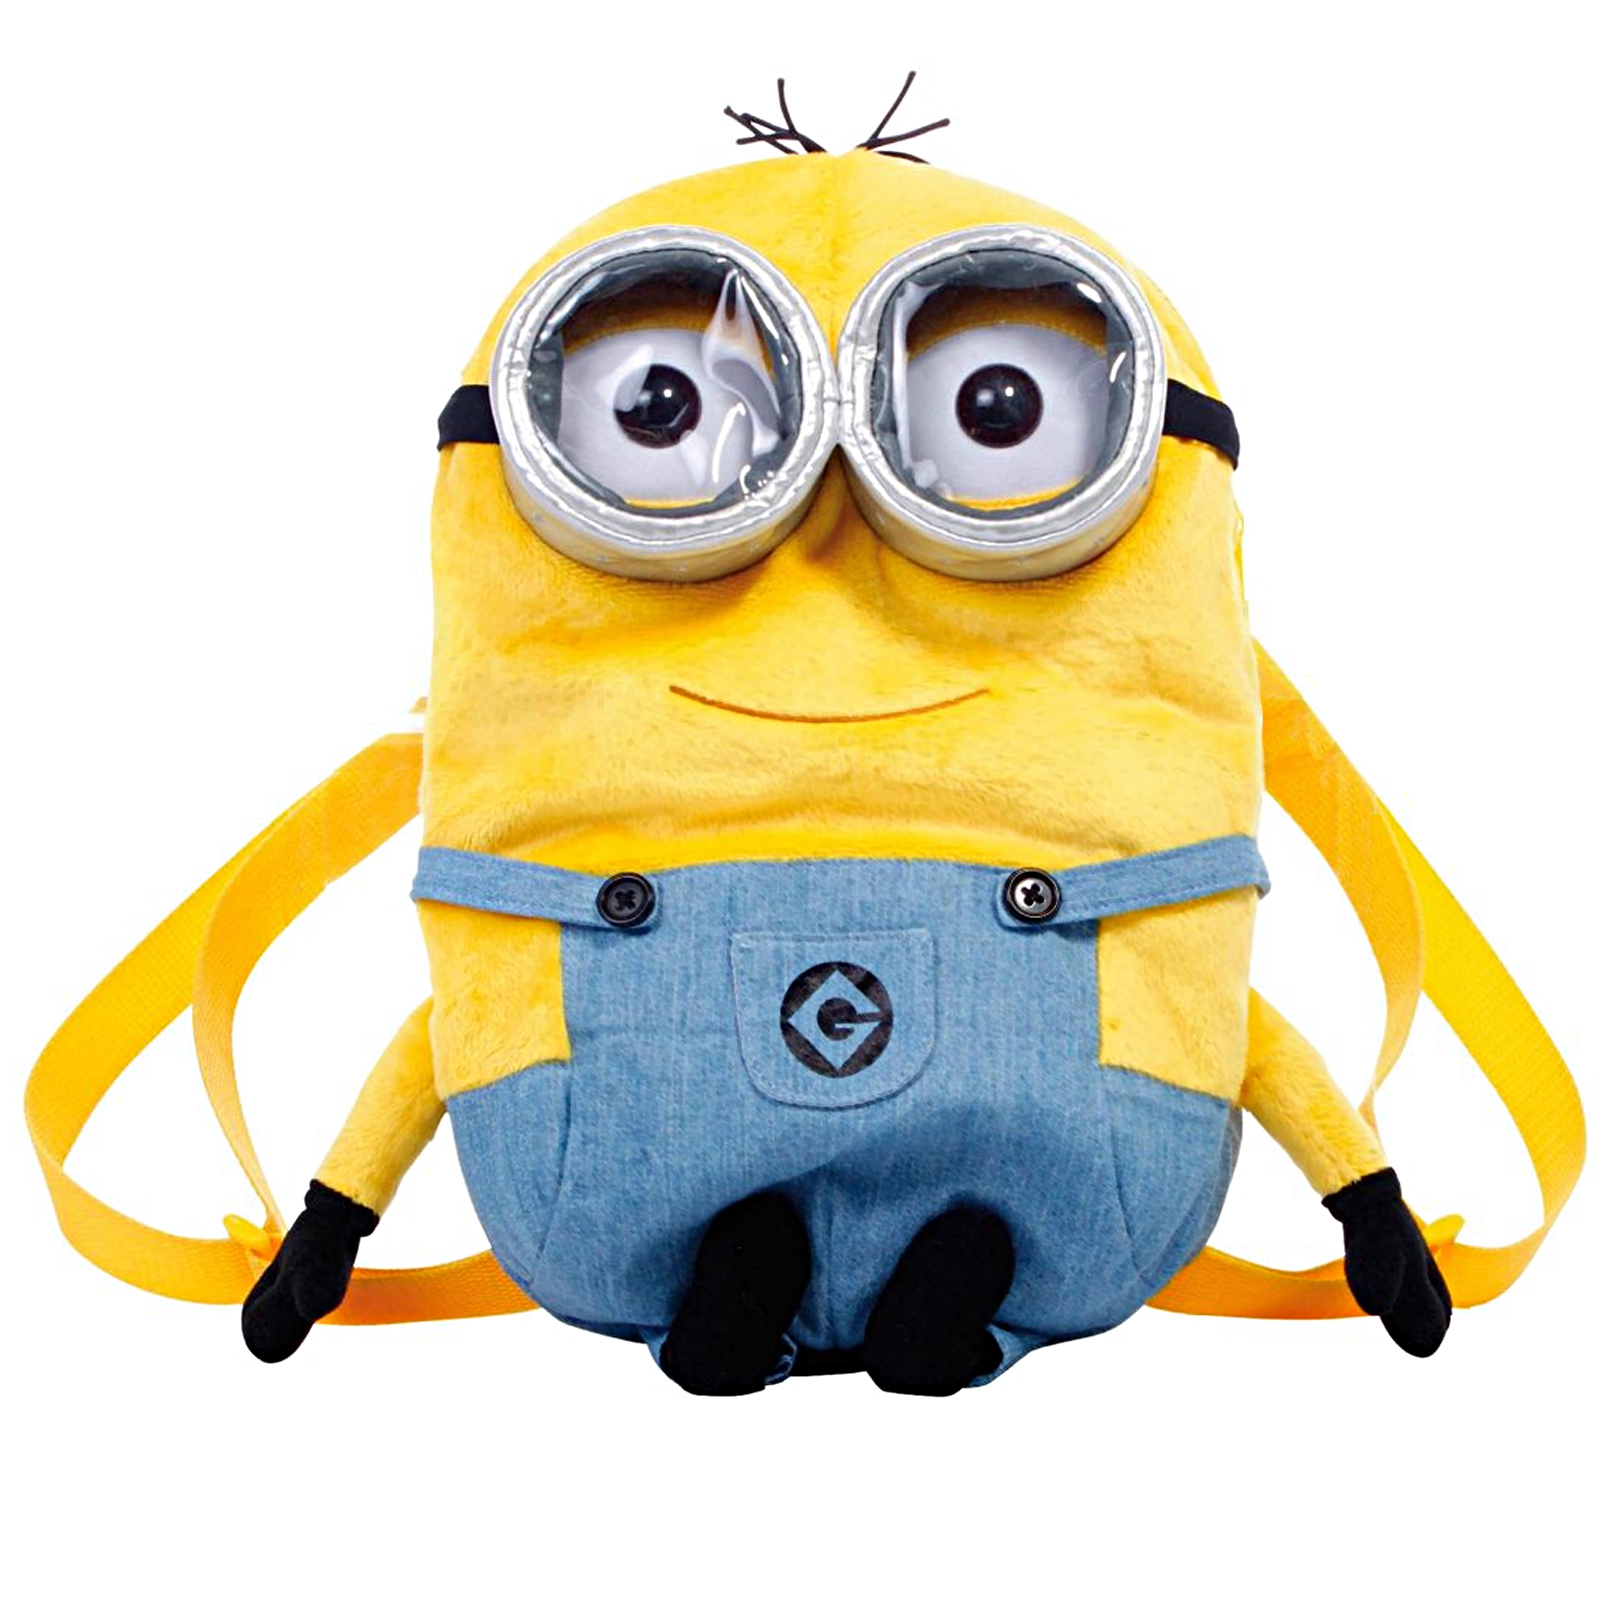 Despicable Me 2 'The Minions' Shaped Plush School Bag Rucksack Backpack